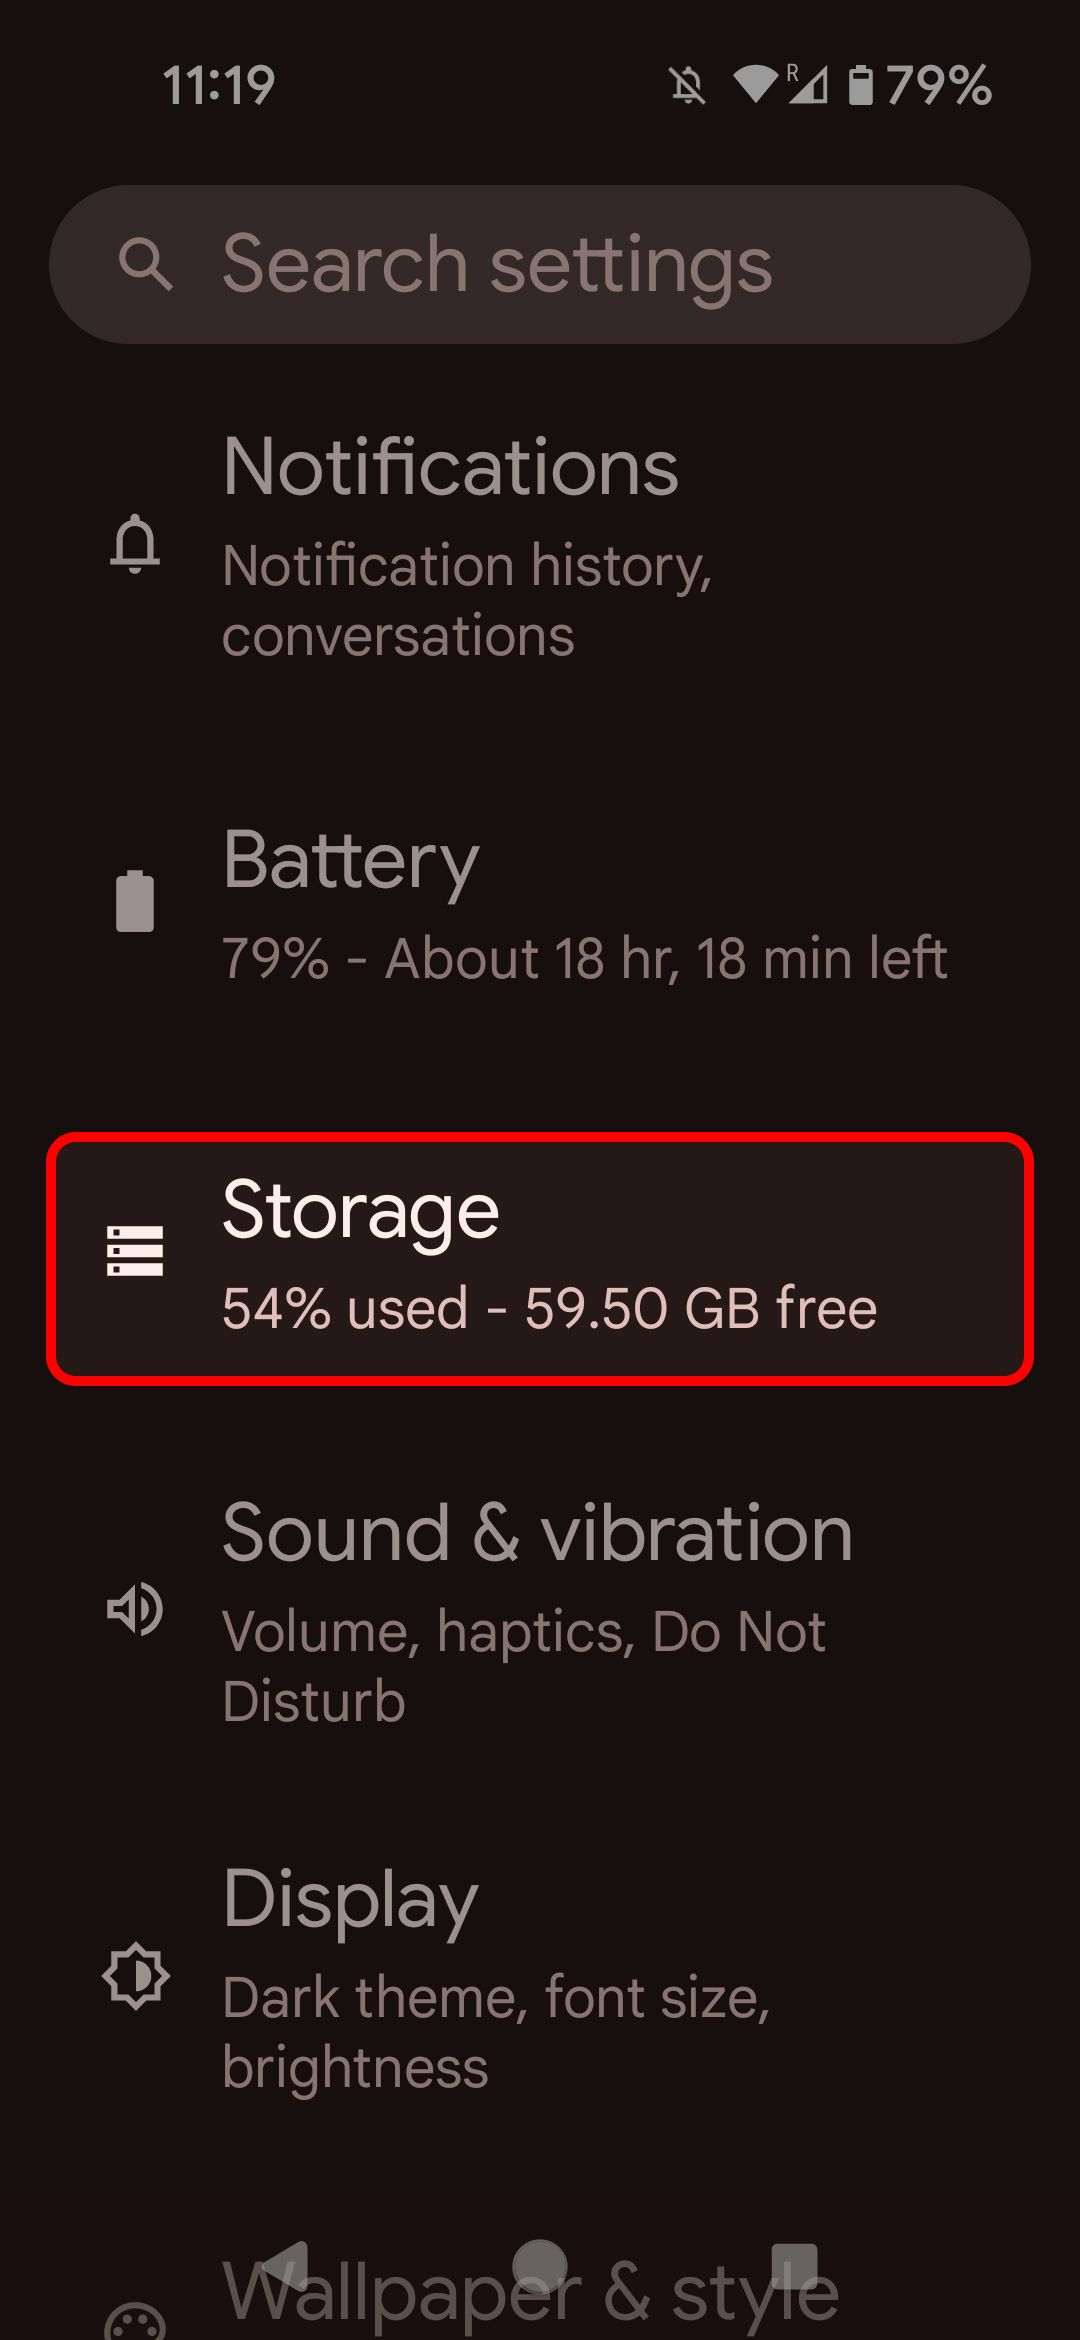 Android settings menu highlighting the Storage option